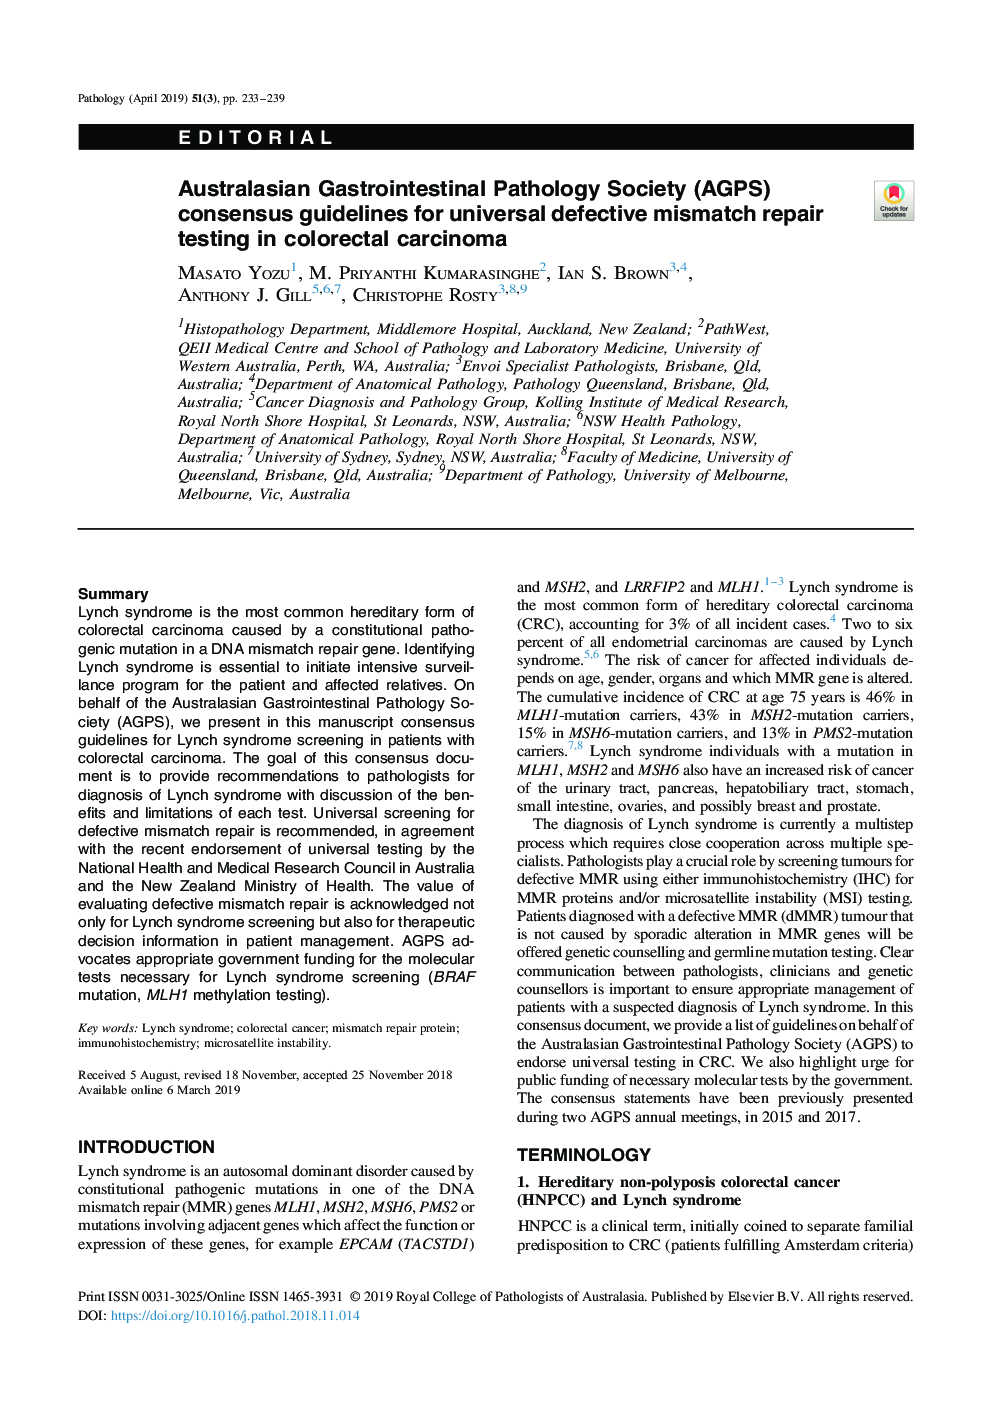 Australasian Gastrointestinal Pathology Society (AGPS) consensus guidelines for universal defective mismatch repair testing in colorectal carcinoma